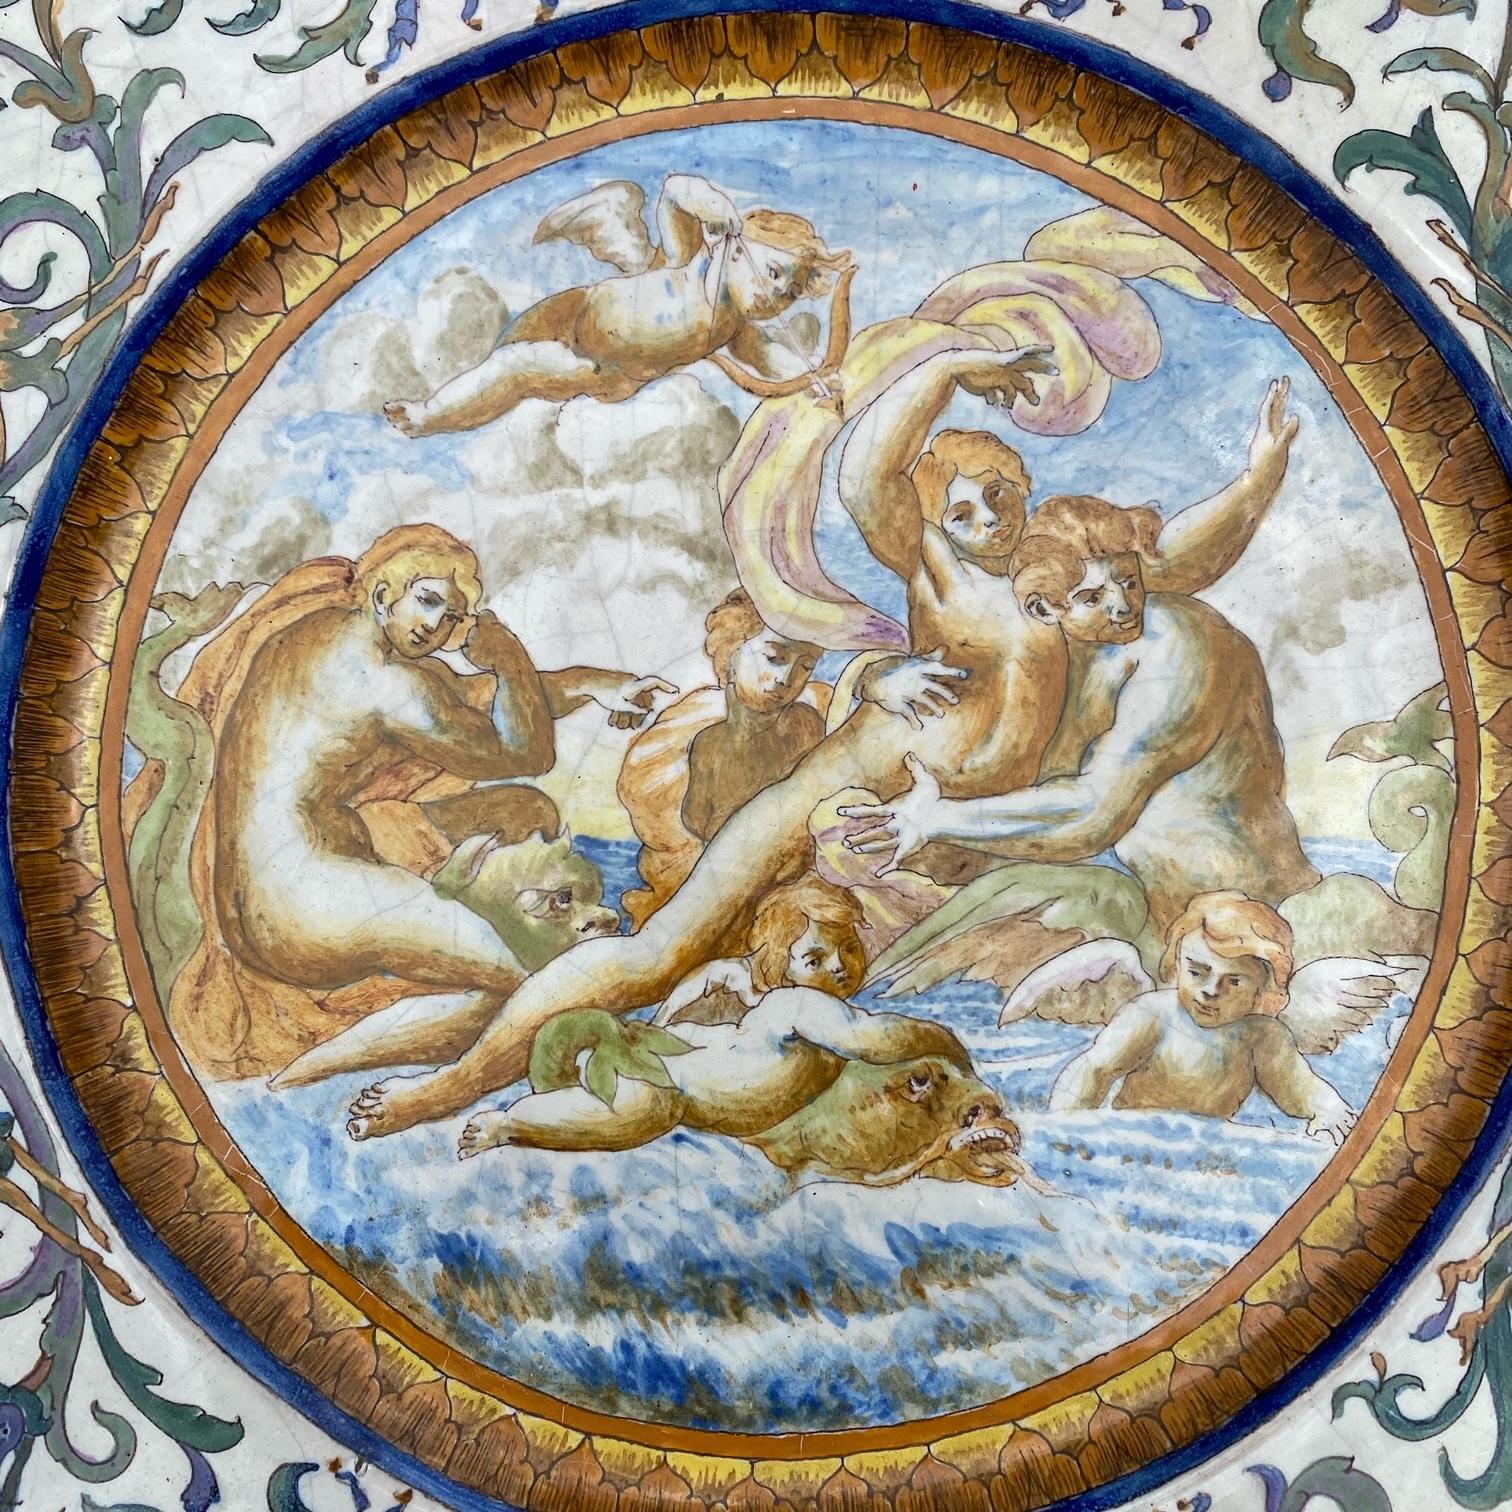 This beautifully hand painted Italian Majolica plate is made of tin glazed earthenware from the early 1800s. The mythological scene shows angels and cherubs in the sea with enchanting sea creatures. The border of the plate depicts a motif of